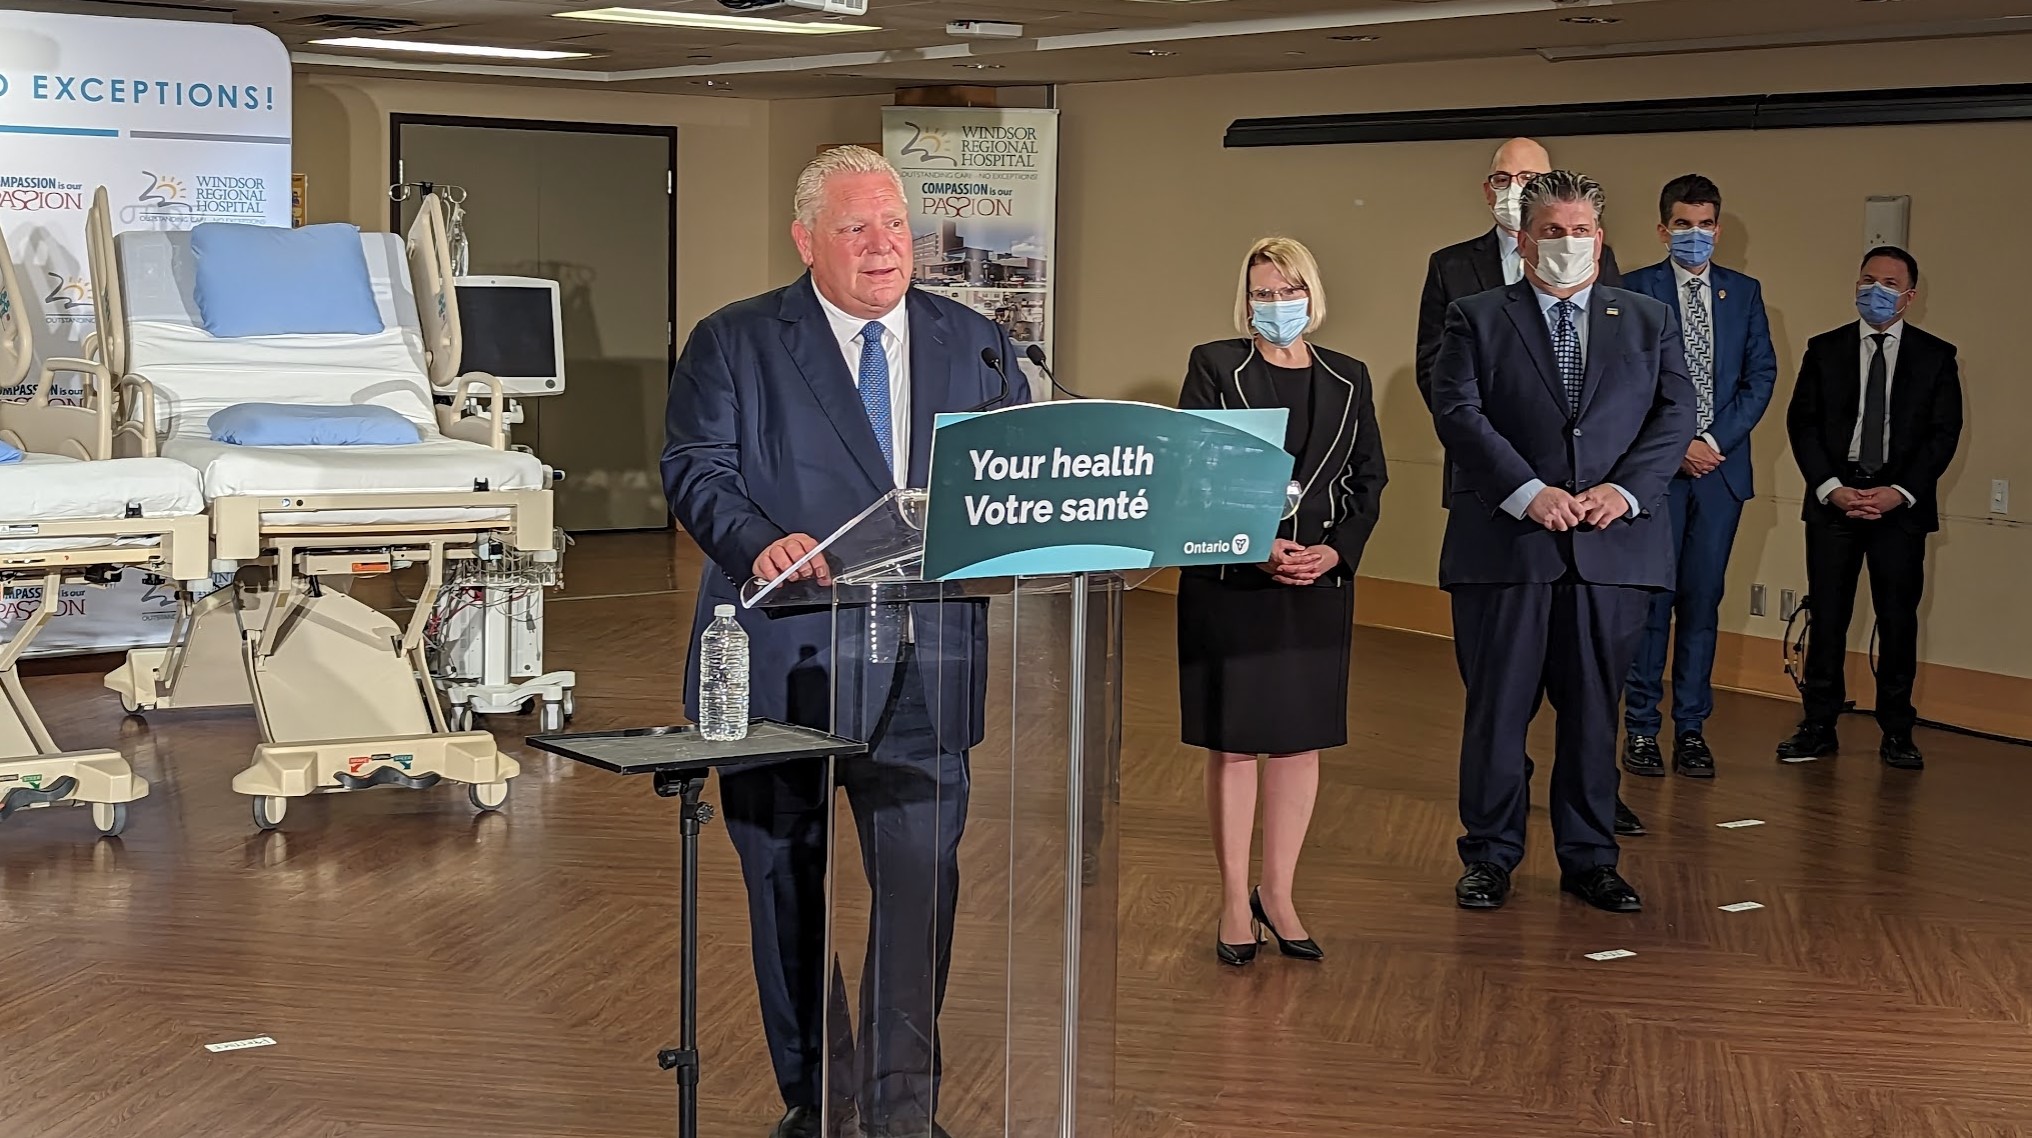 Rose City Politics: Jon Liedtke asks Premier Ford if health changes are enough (VIDEO)